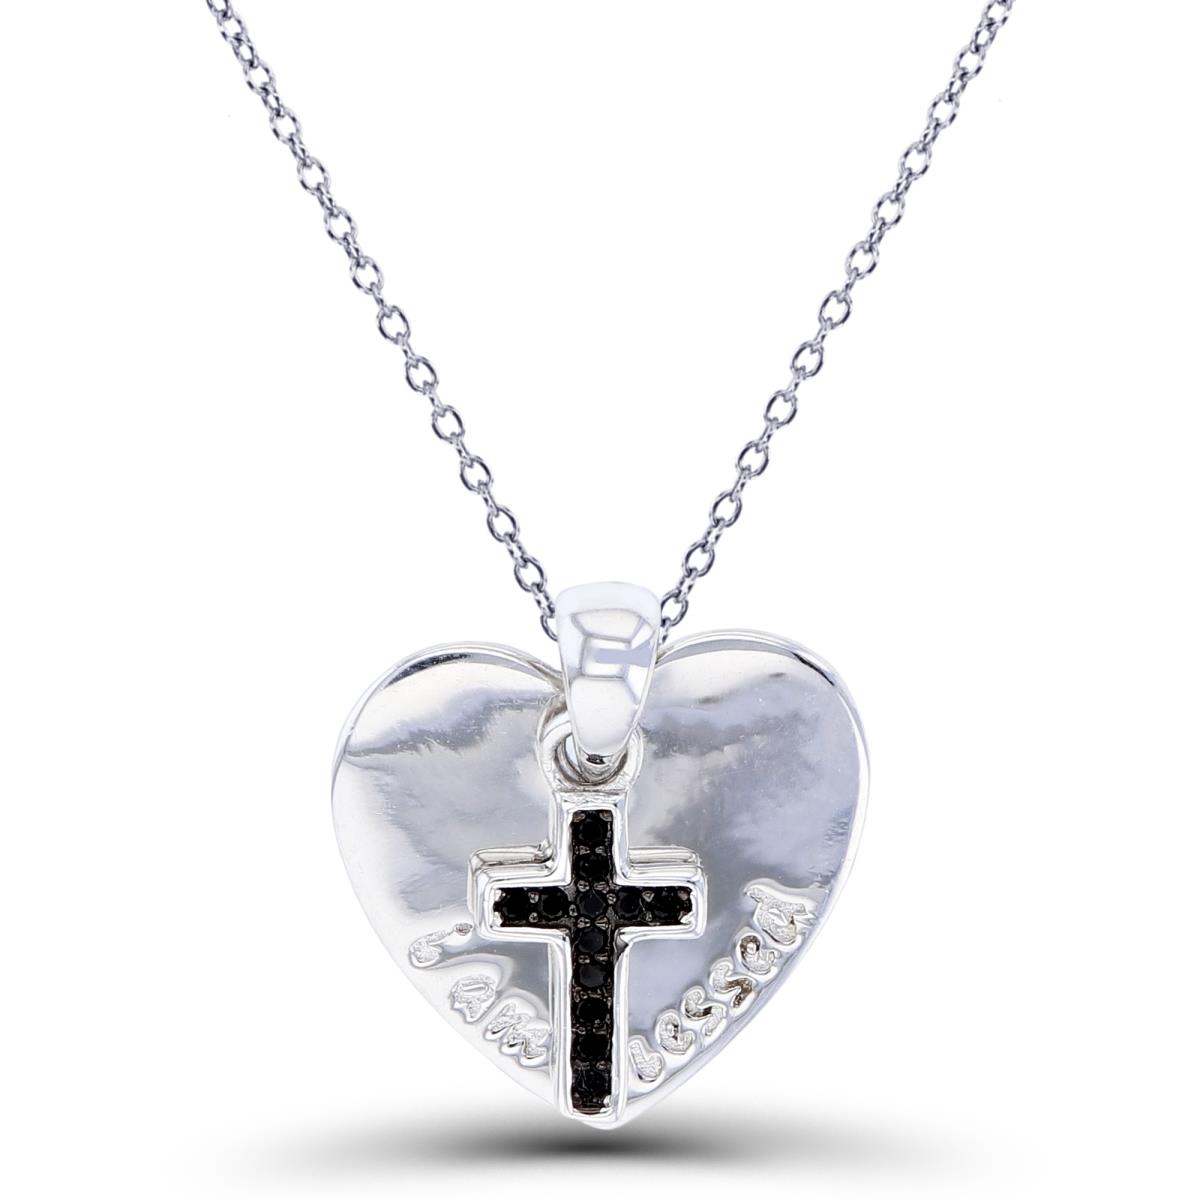 Sterling Silver Two-Tone Rnd Black Spinel Cross & "I am blessed"High Polish Heart 18"Necklace